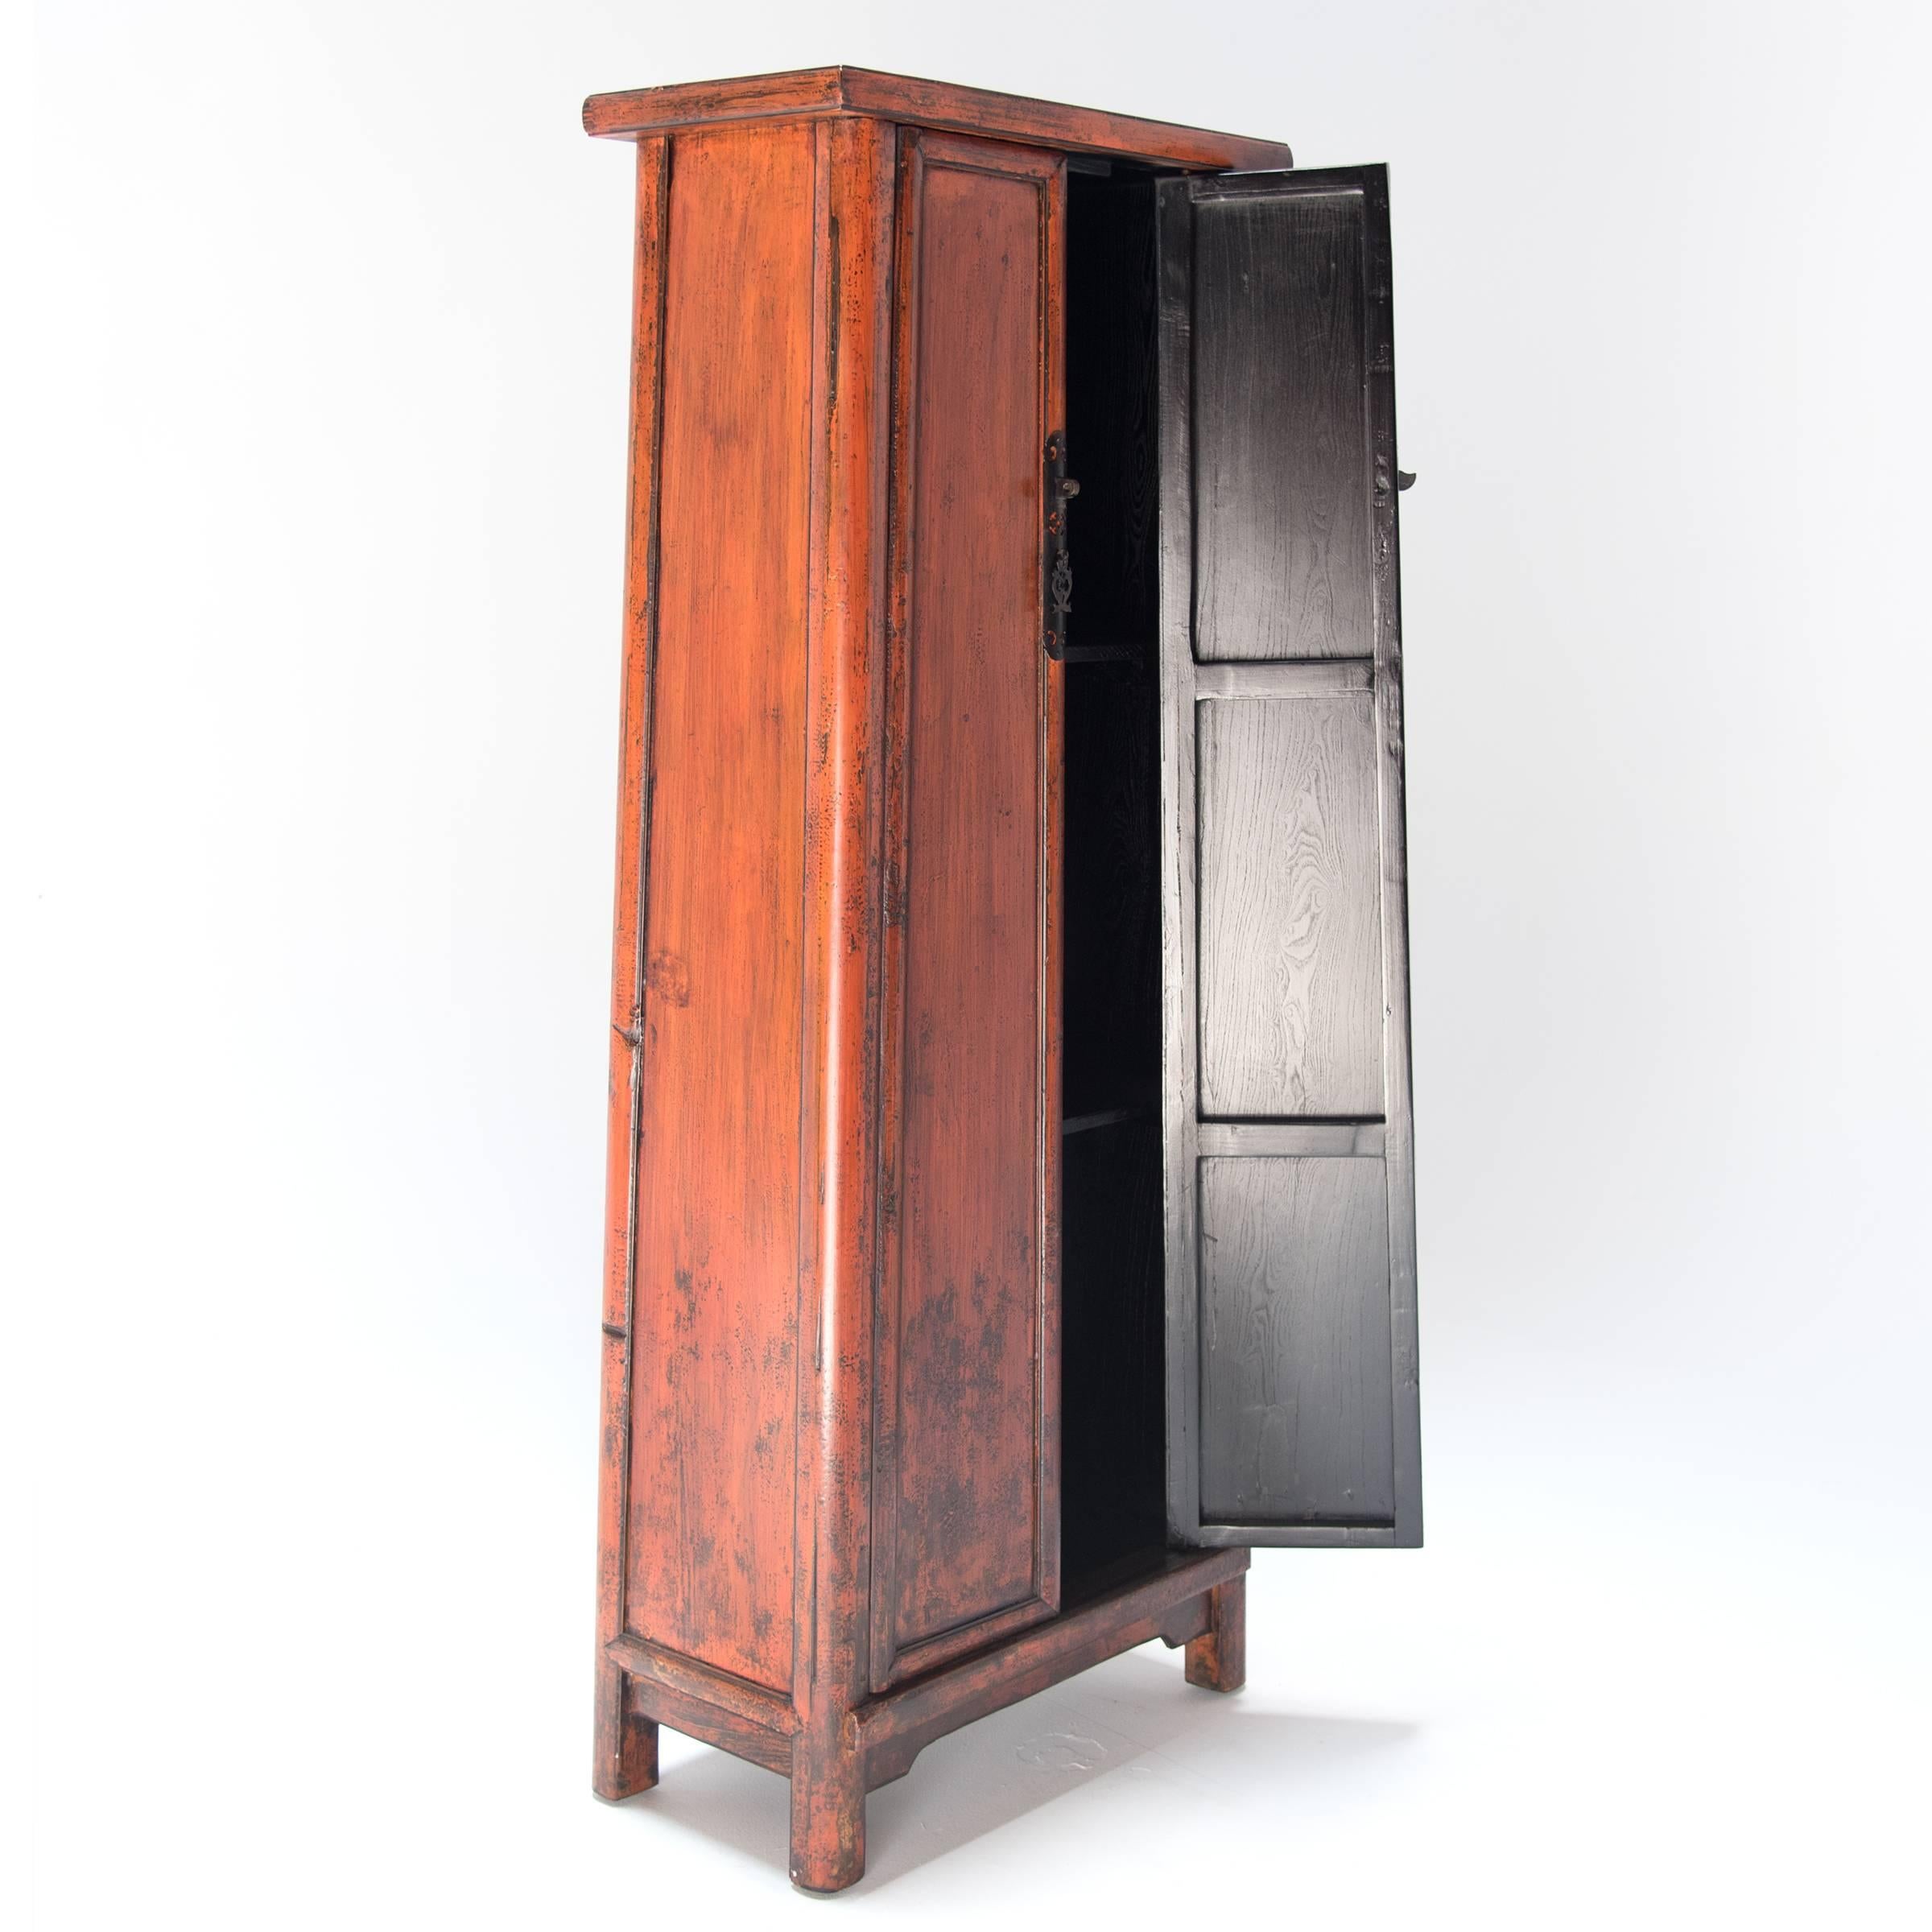 A master craftsman from China’s Hebei Province made this narrow cabinet over a hundred years ago. It has beautiful hardware and simple, clean lines that sweep upward at a slightly tapered angle and give the overall cabinet a lighter form. It is